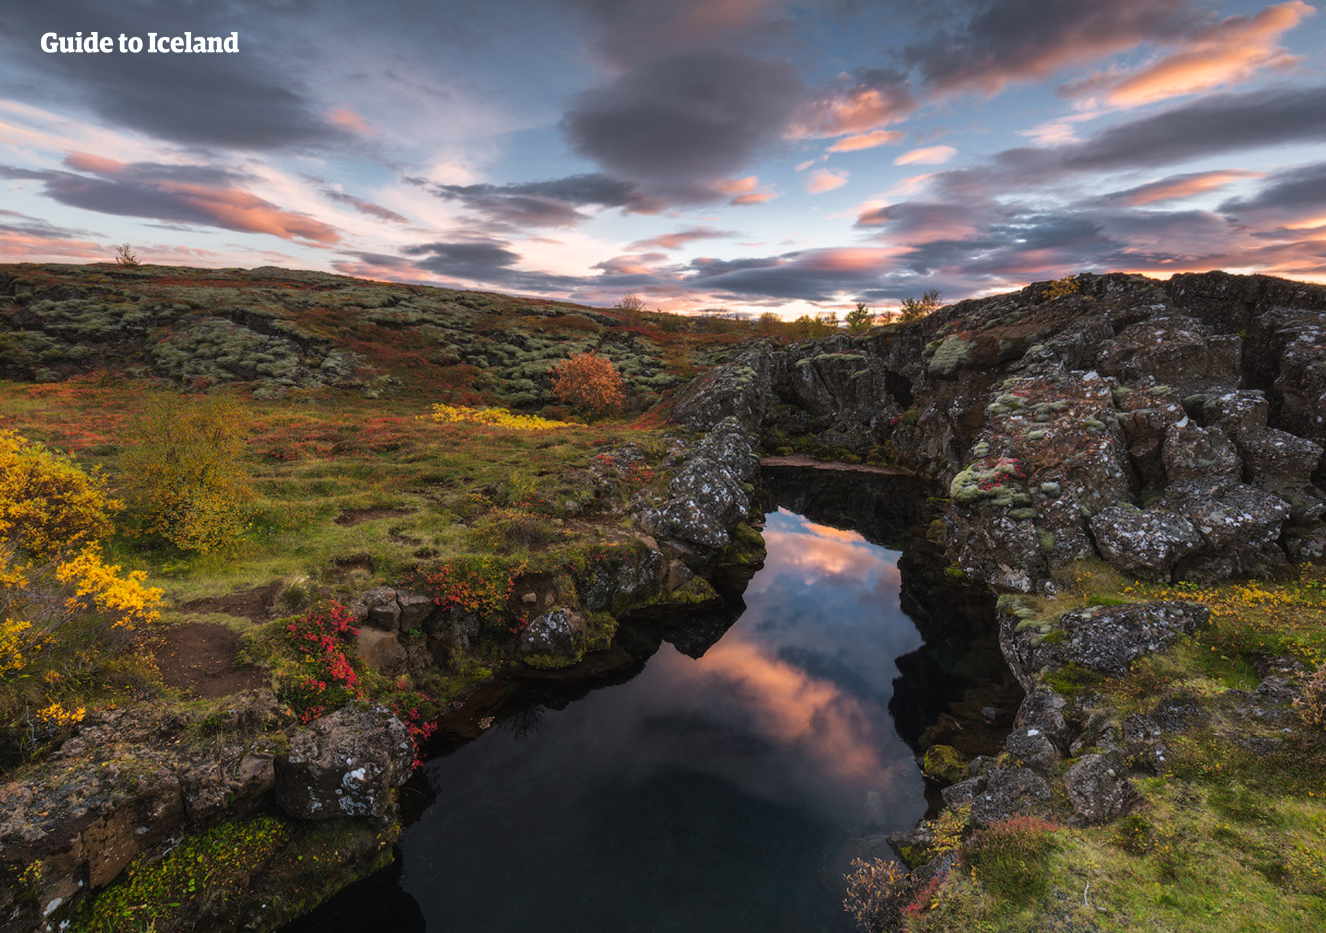 Þingvellir National Park is Iceland's only UNESCO World Heritage site and one of the major stops along the world famous Golden Circle sightseeing route.